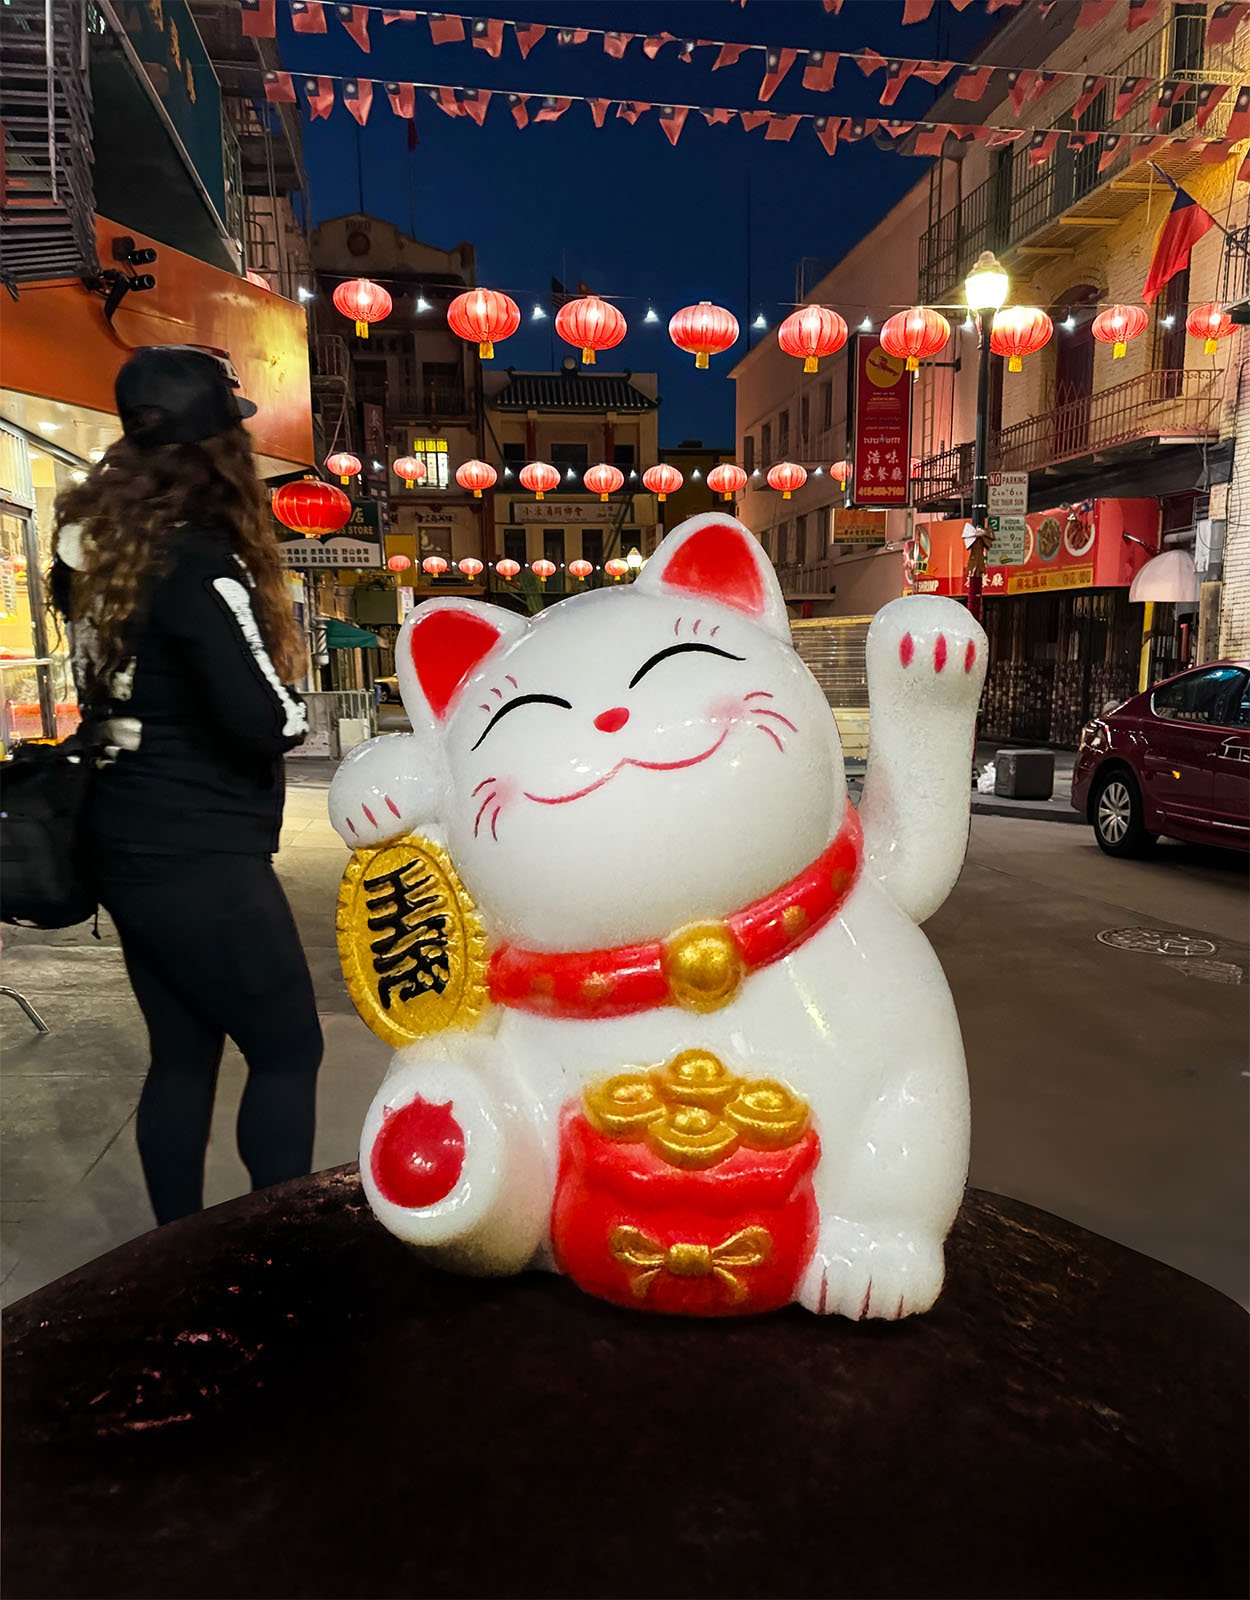 A large Maneki-neko (beckoning cat) statue with a raised paw and a red collar stands prominently in a lantern-lit street. In the background, a person wearing a black outfit and cap walks away, and red lanterns hang overhead, illuminating the evening scene.